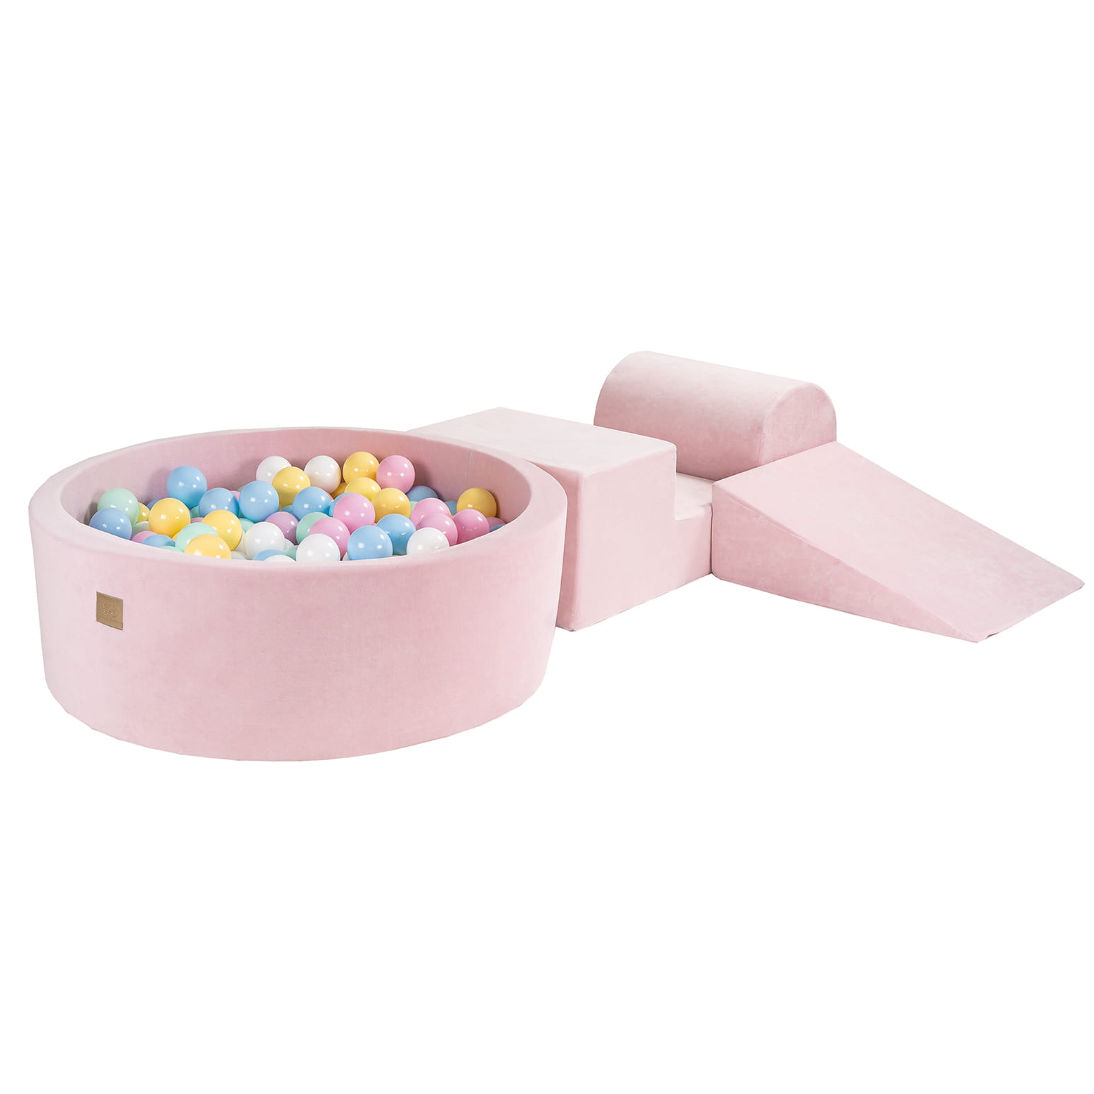 Playsystem with Ball Pit, Pink